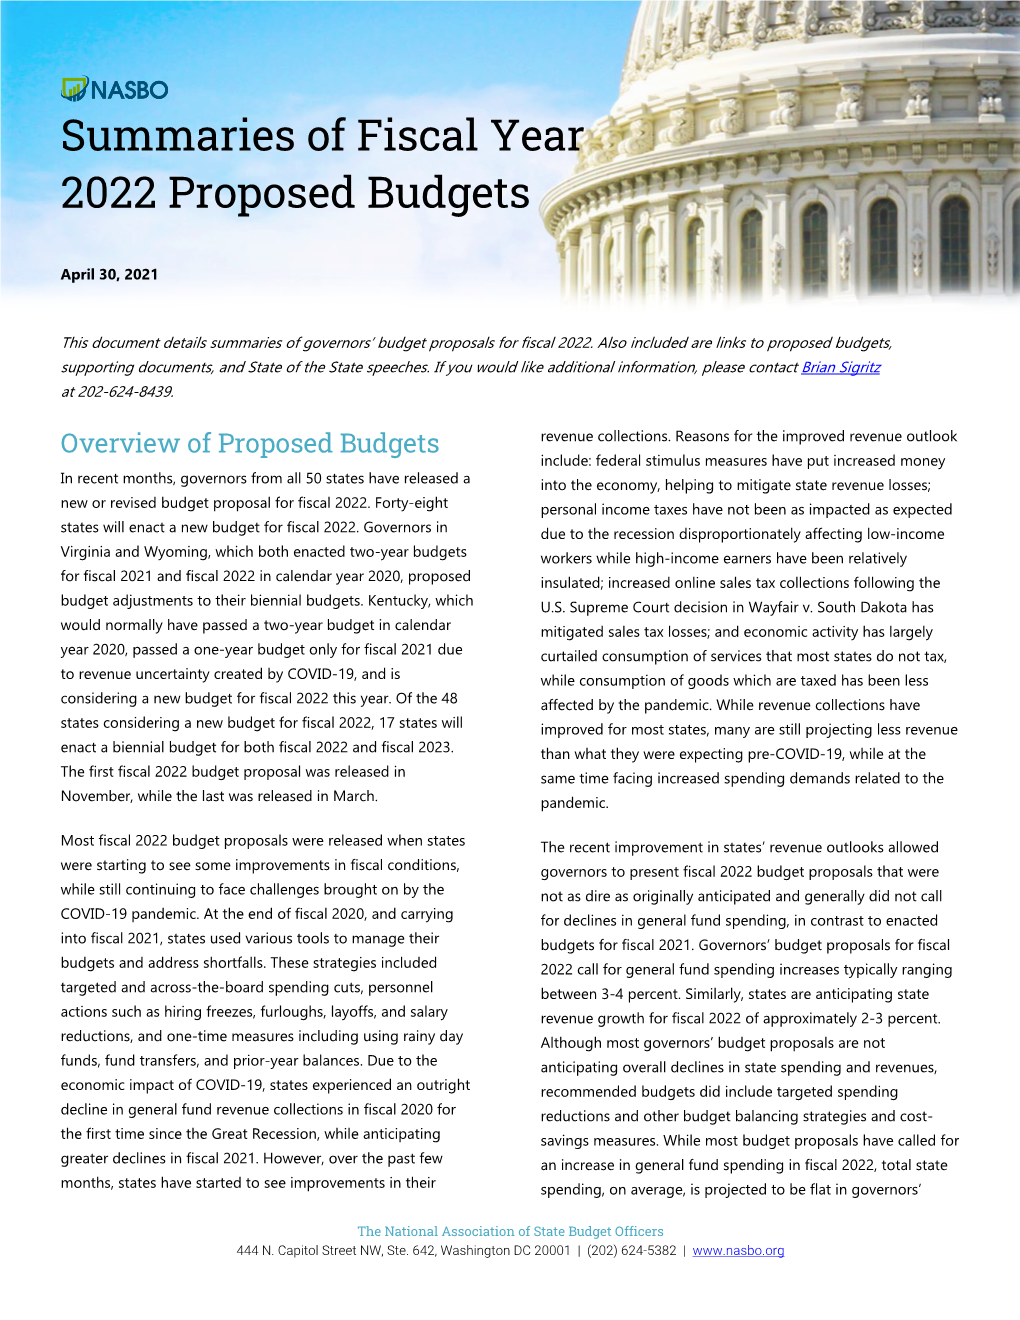 Summaries of Fiscal Year 2022 Proposed Budgets